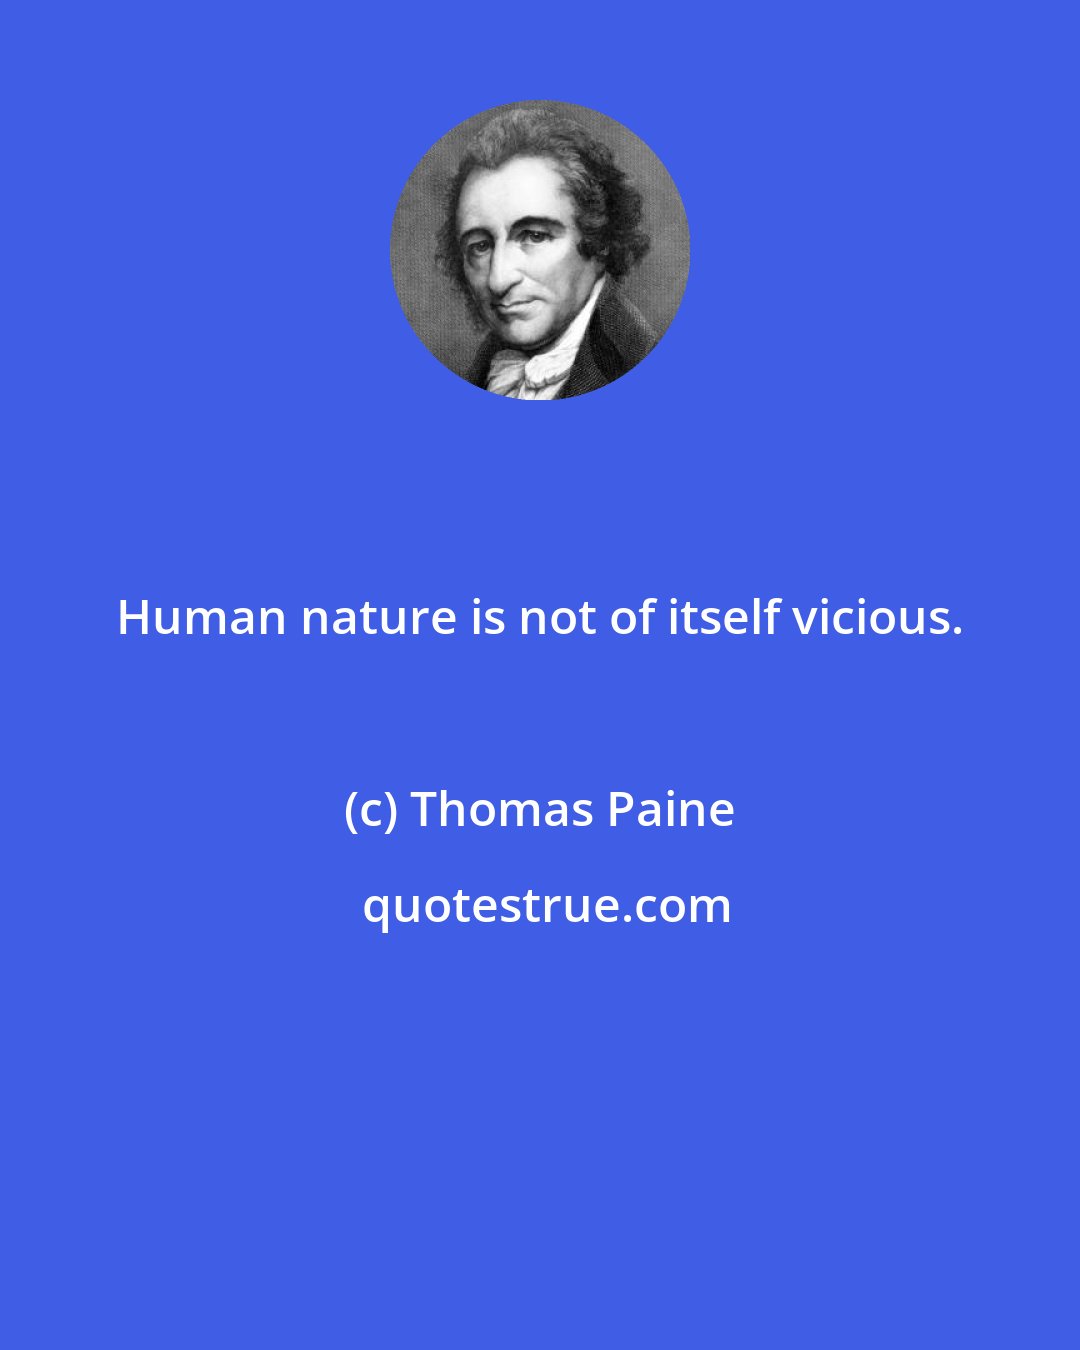 Thomas Paine: Human nature is not of itself vicious.